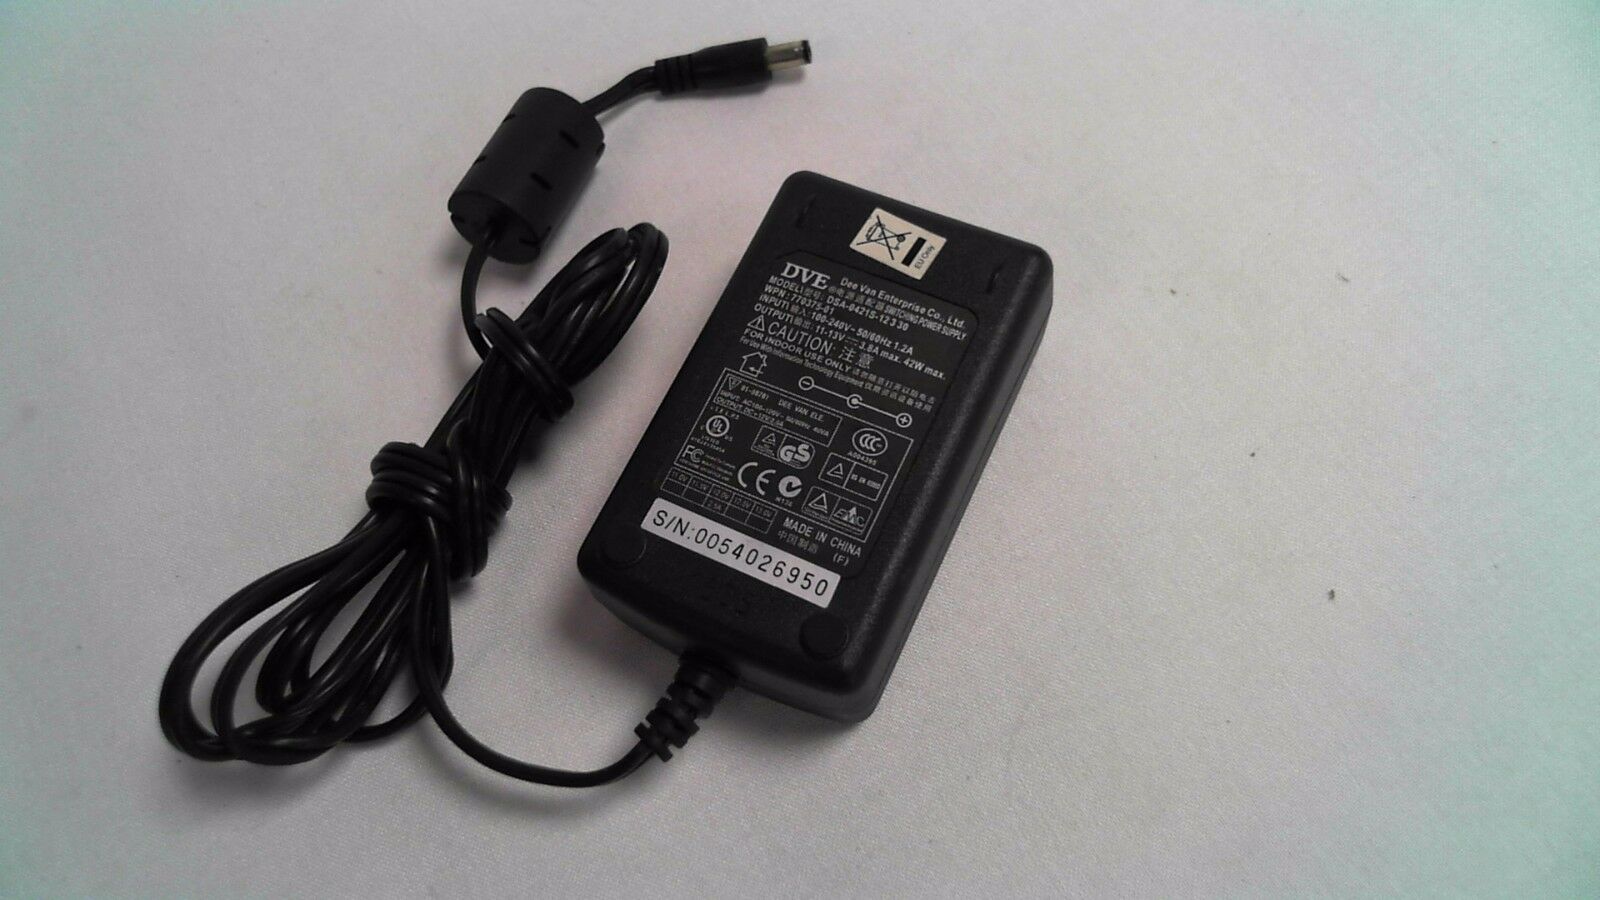 DVE AC ADAPTER Charger 11V - 13V 3.8A DSA-0421S-12 3 30 #24A240 Compatible Brand: DVE Type: Power Adapter MPN: DSA-